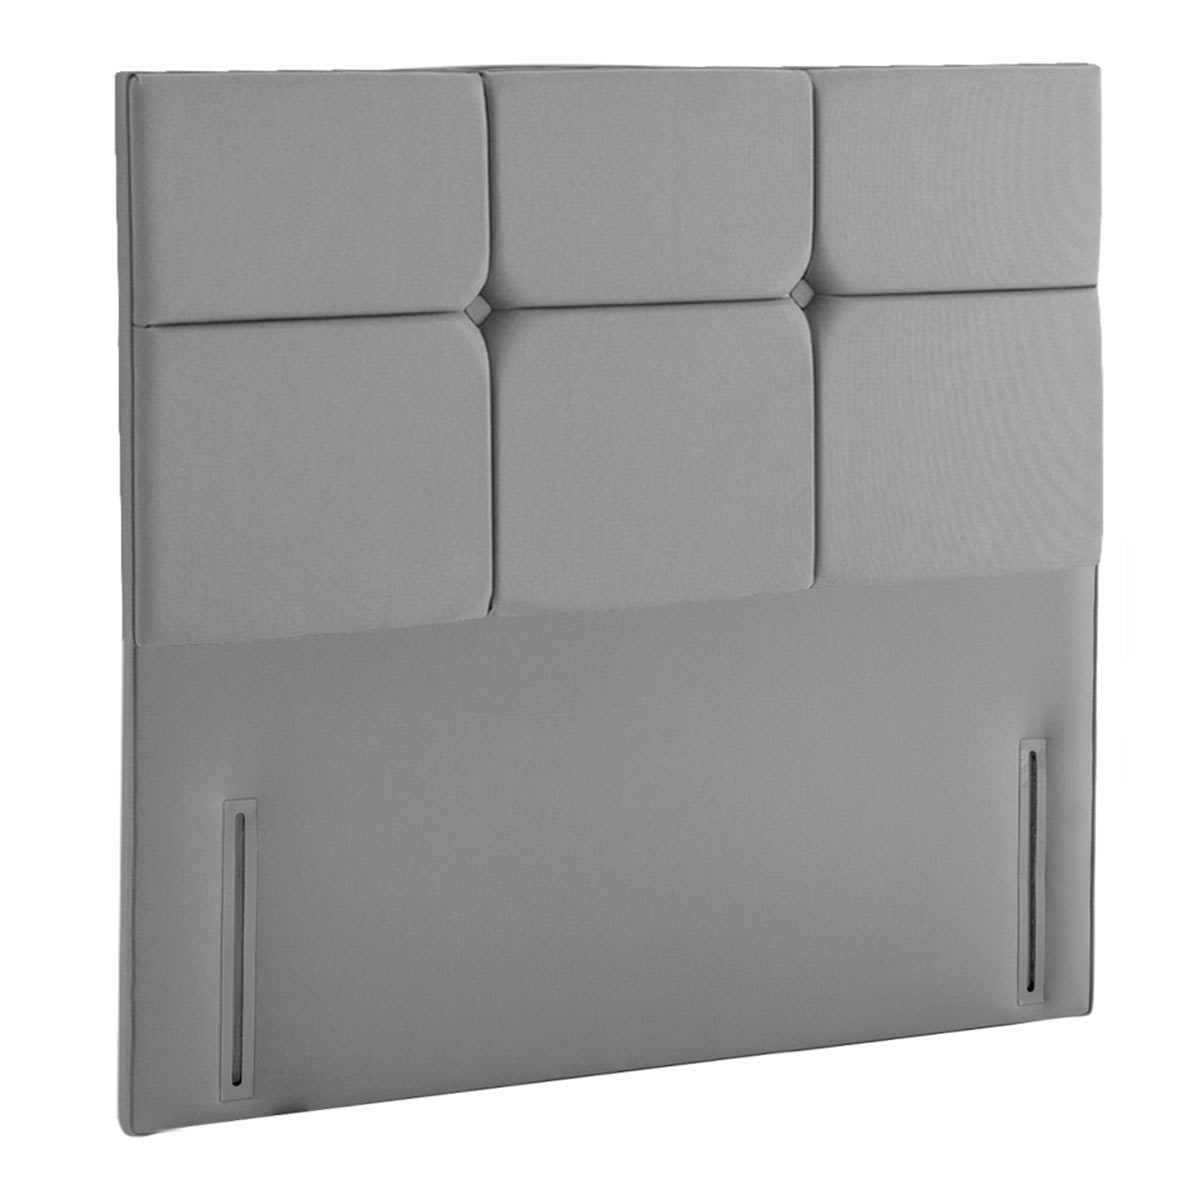 Cut out image of slate headboard alone on white background